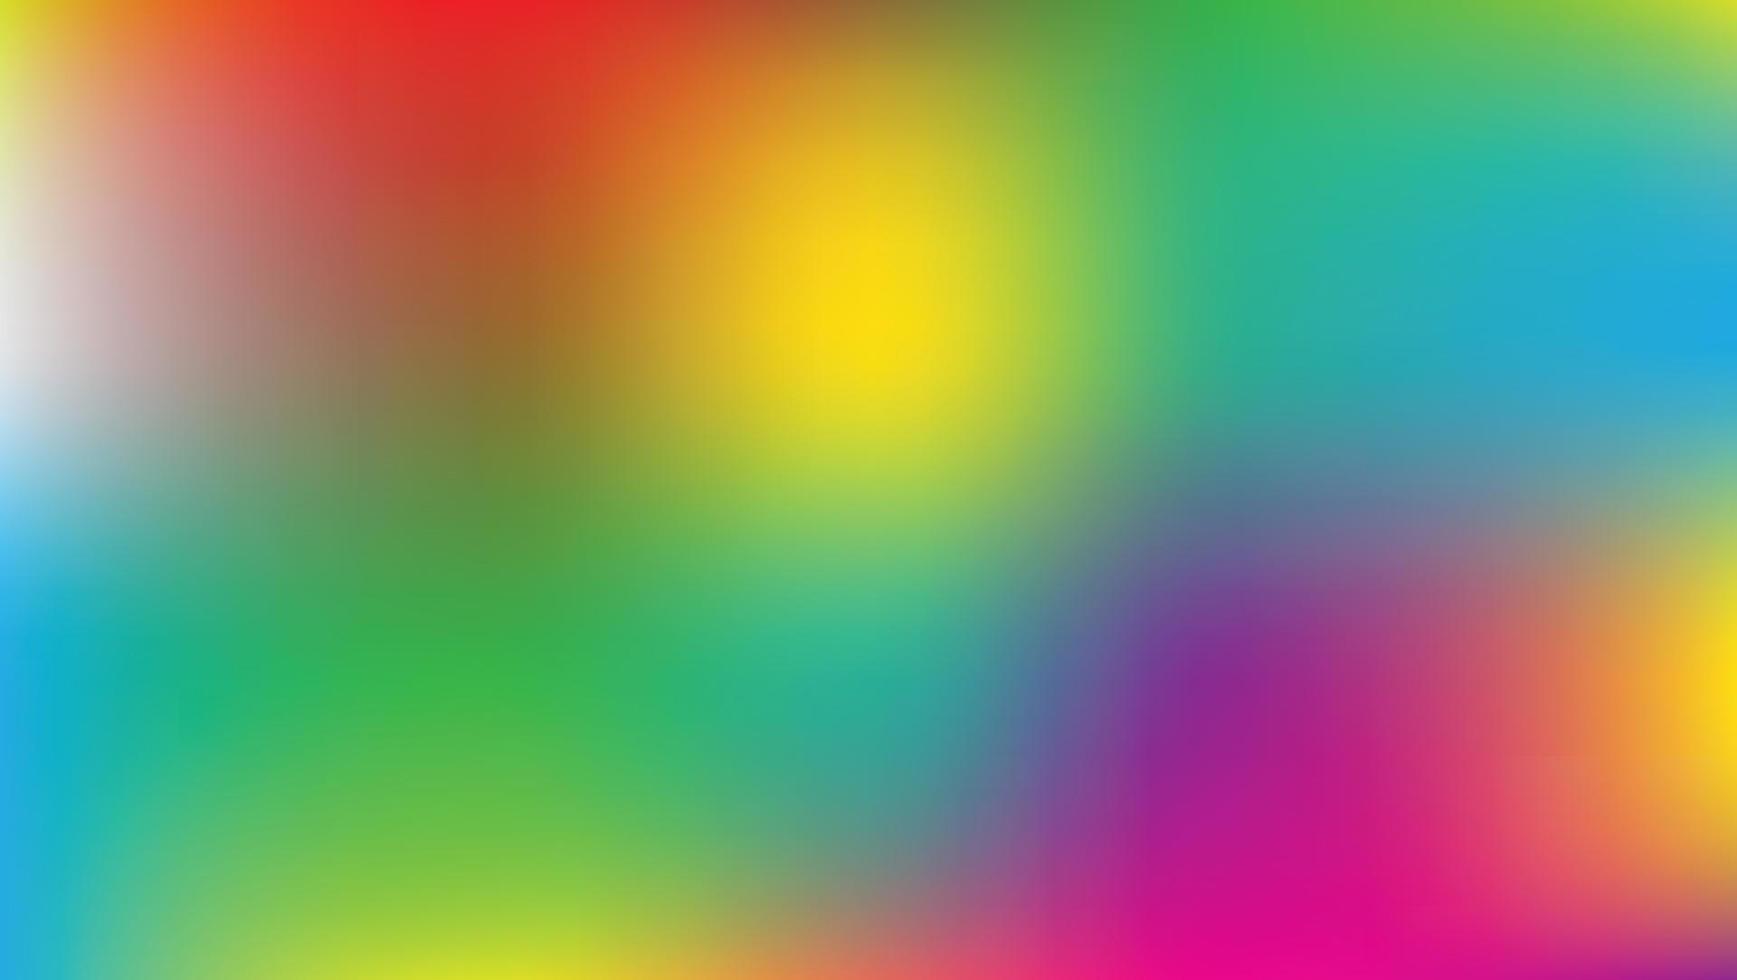 Colorful gradient abstract background for social media, banner and poster design vector